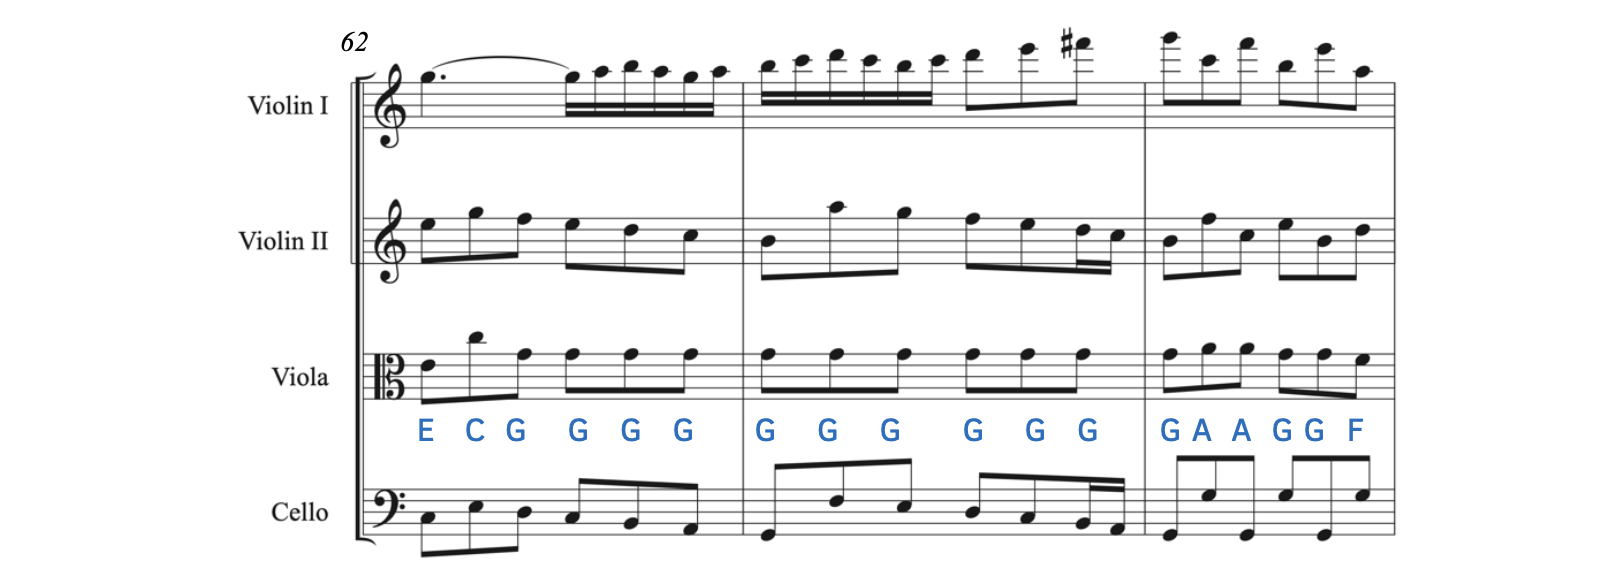 Example from Hensel's String Quartet in E-flat Major, H277, second movement. The viola begins with an eighth note on the fourth line. In the alto clef, this note is E4. The rest of the pitches are given in the alto clef.